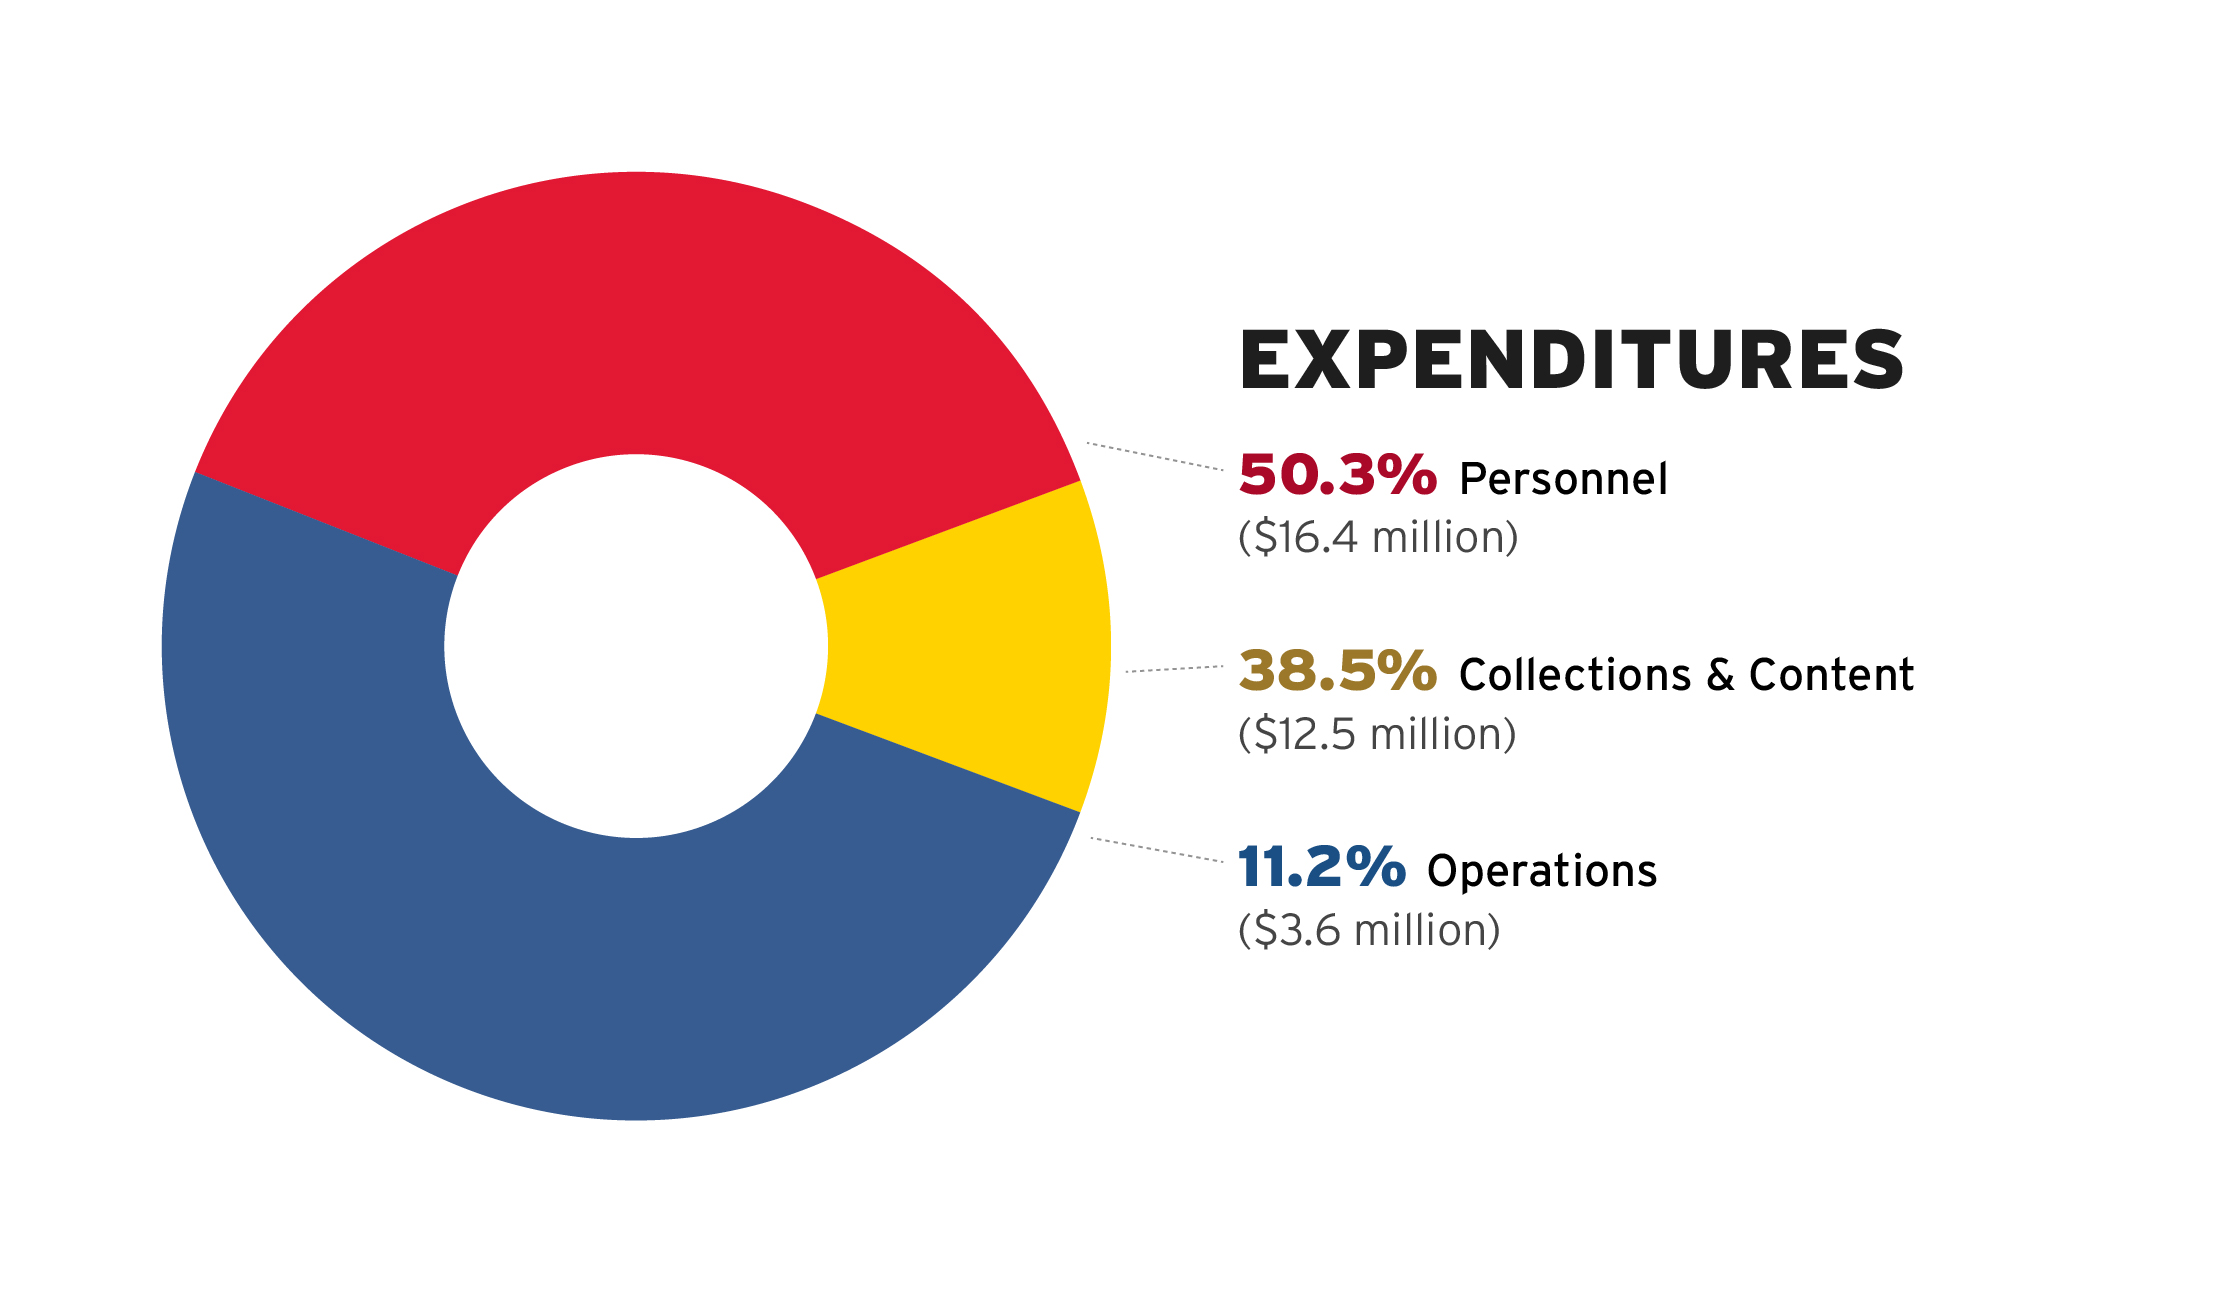 Expenditures pie chart. Information repeated above.